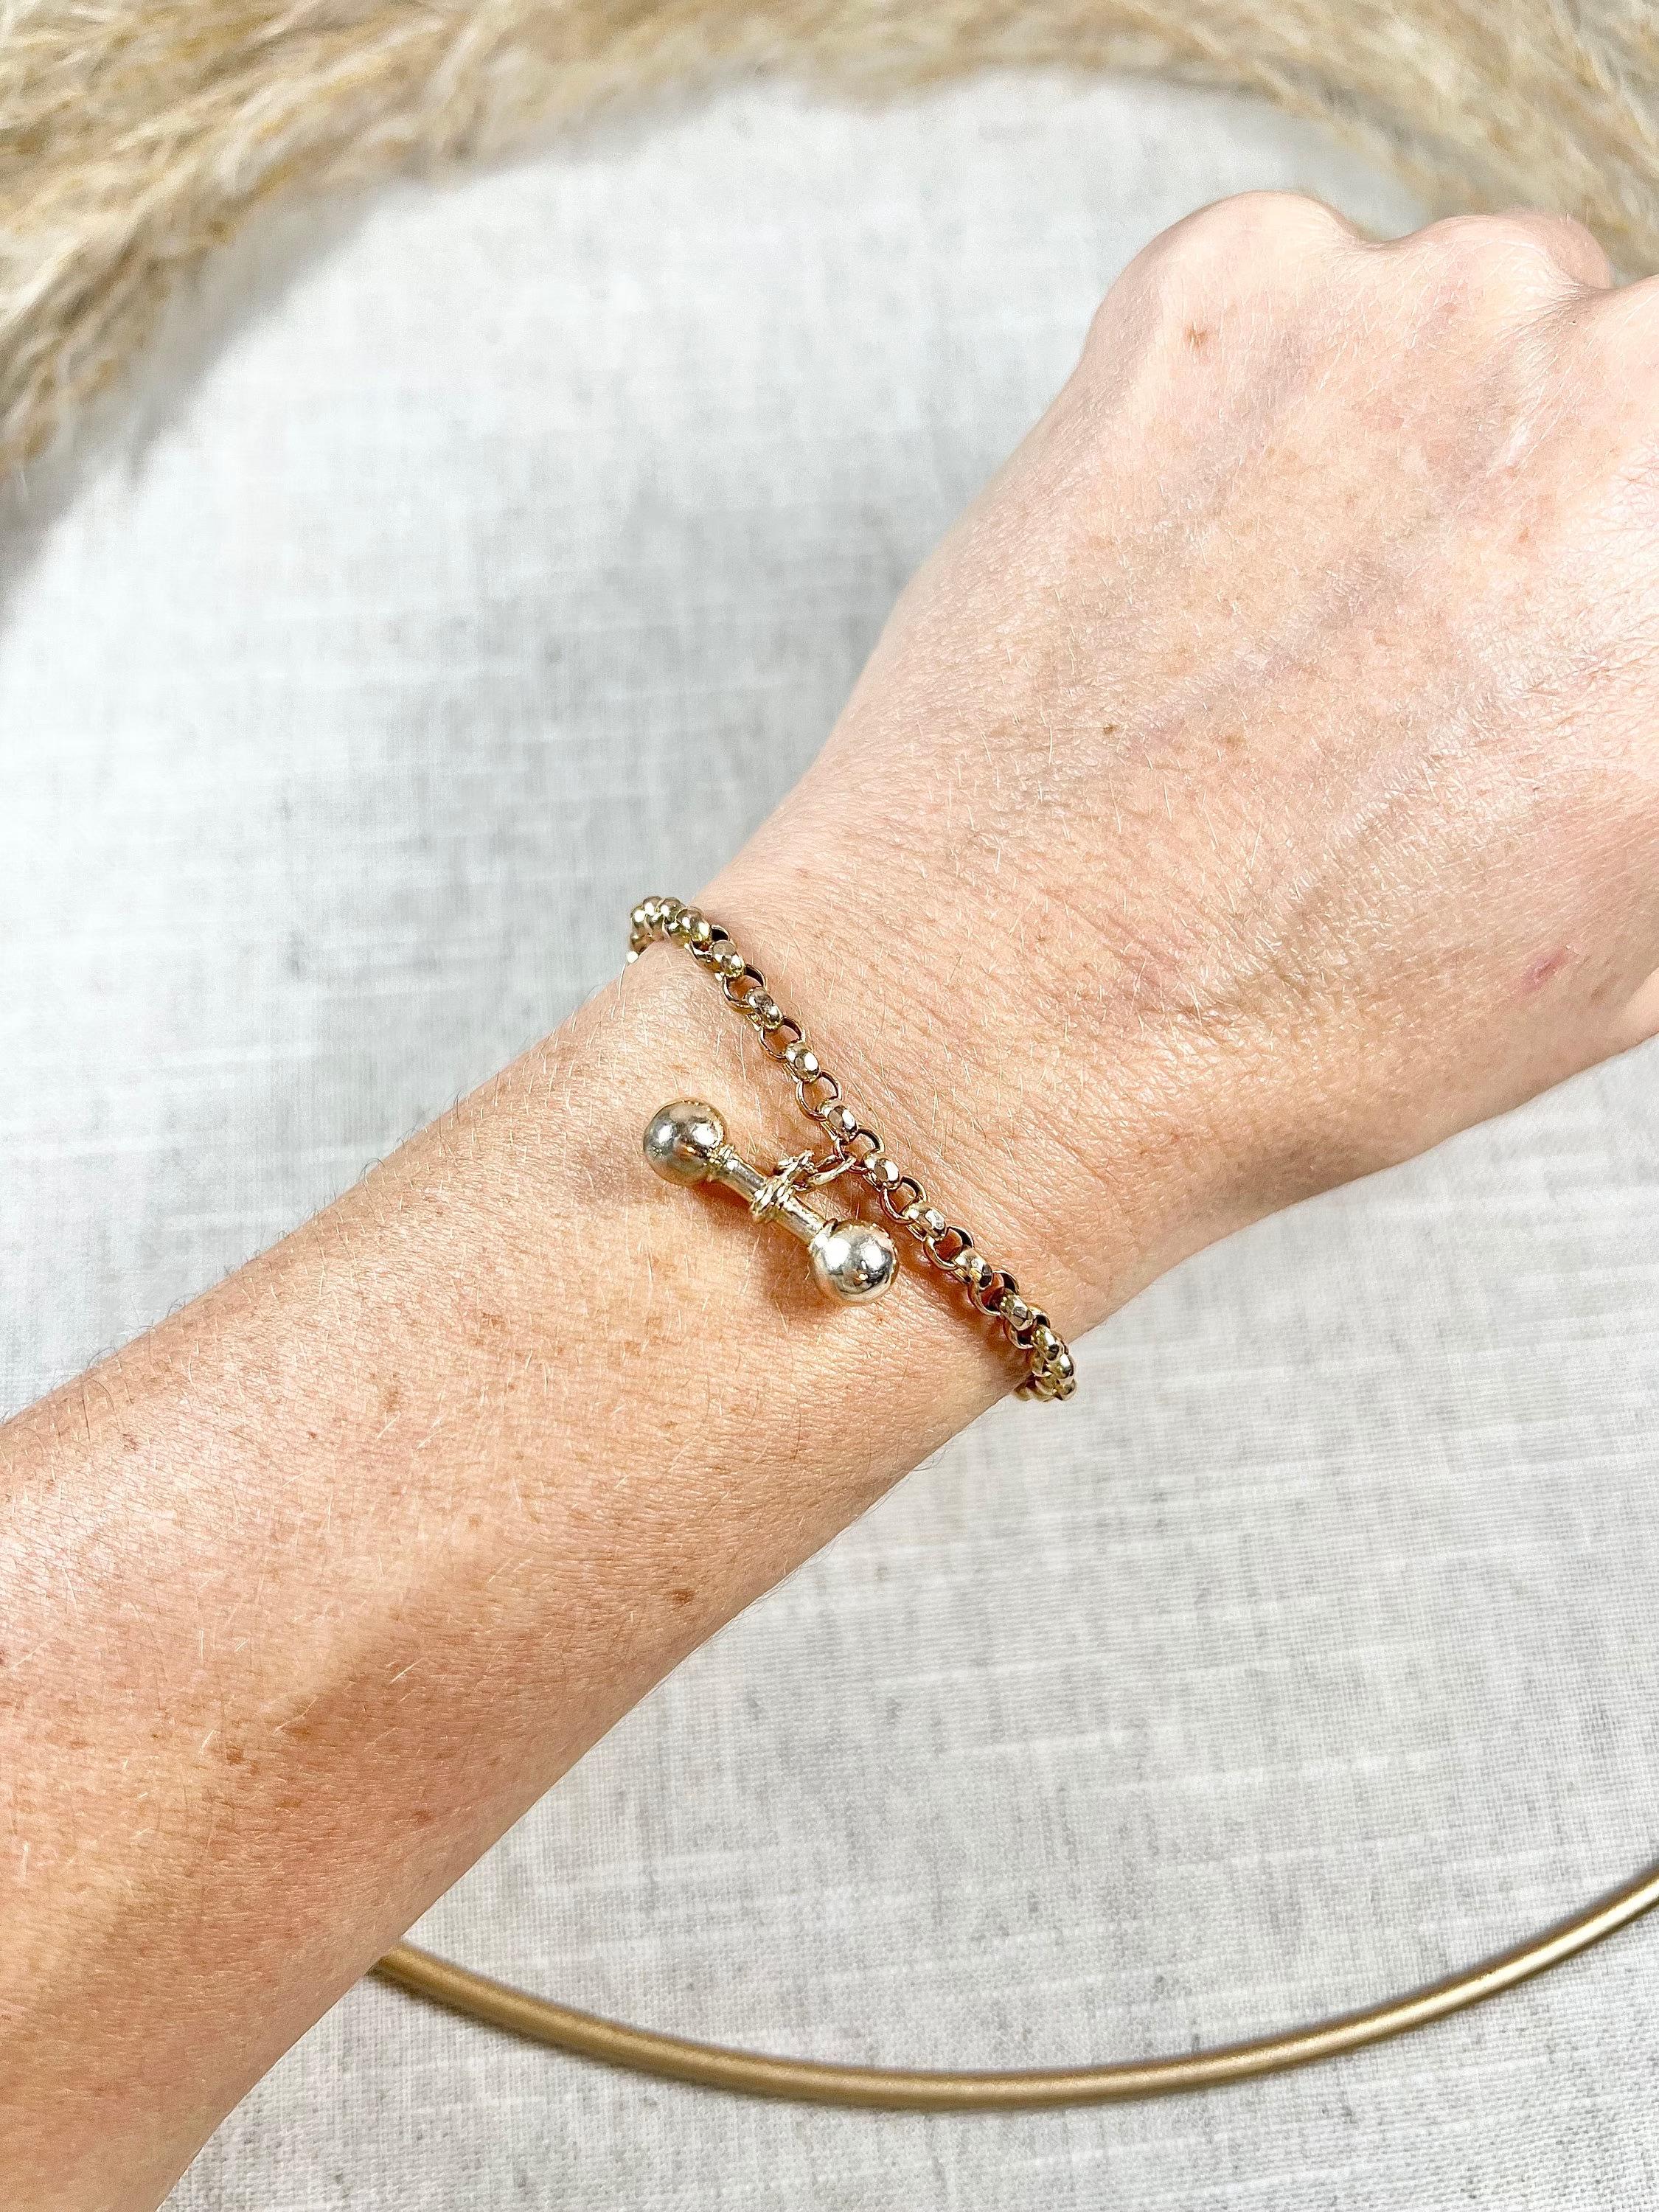 Antique Rose Gold Bracelet 

9ct Gold Stamped 

Circa 1900

This 9ct pale yellow gold bracelet features a beautifully faceted belcher link design that adds a touch of elegance to any outfit. The bracelet is secured with a swivel clasp and features a